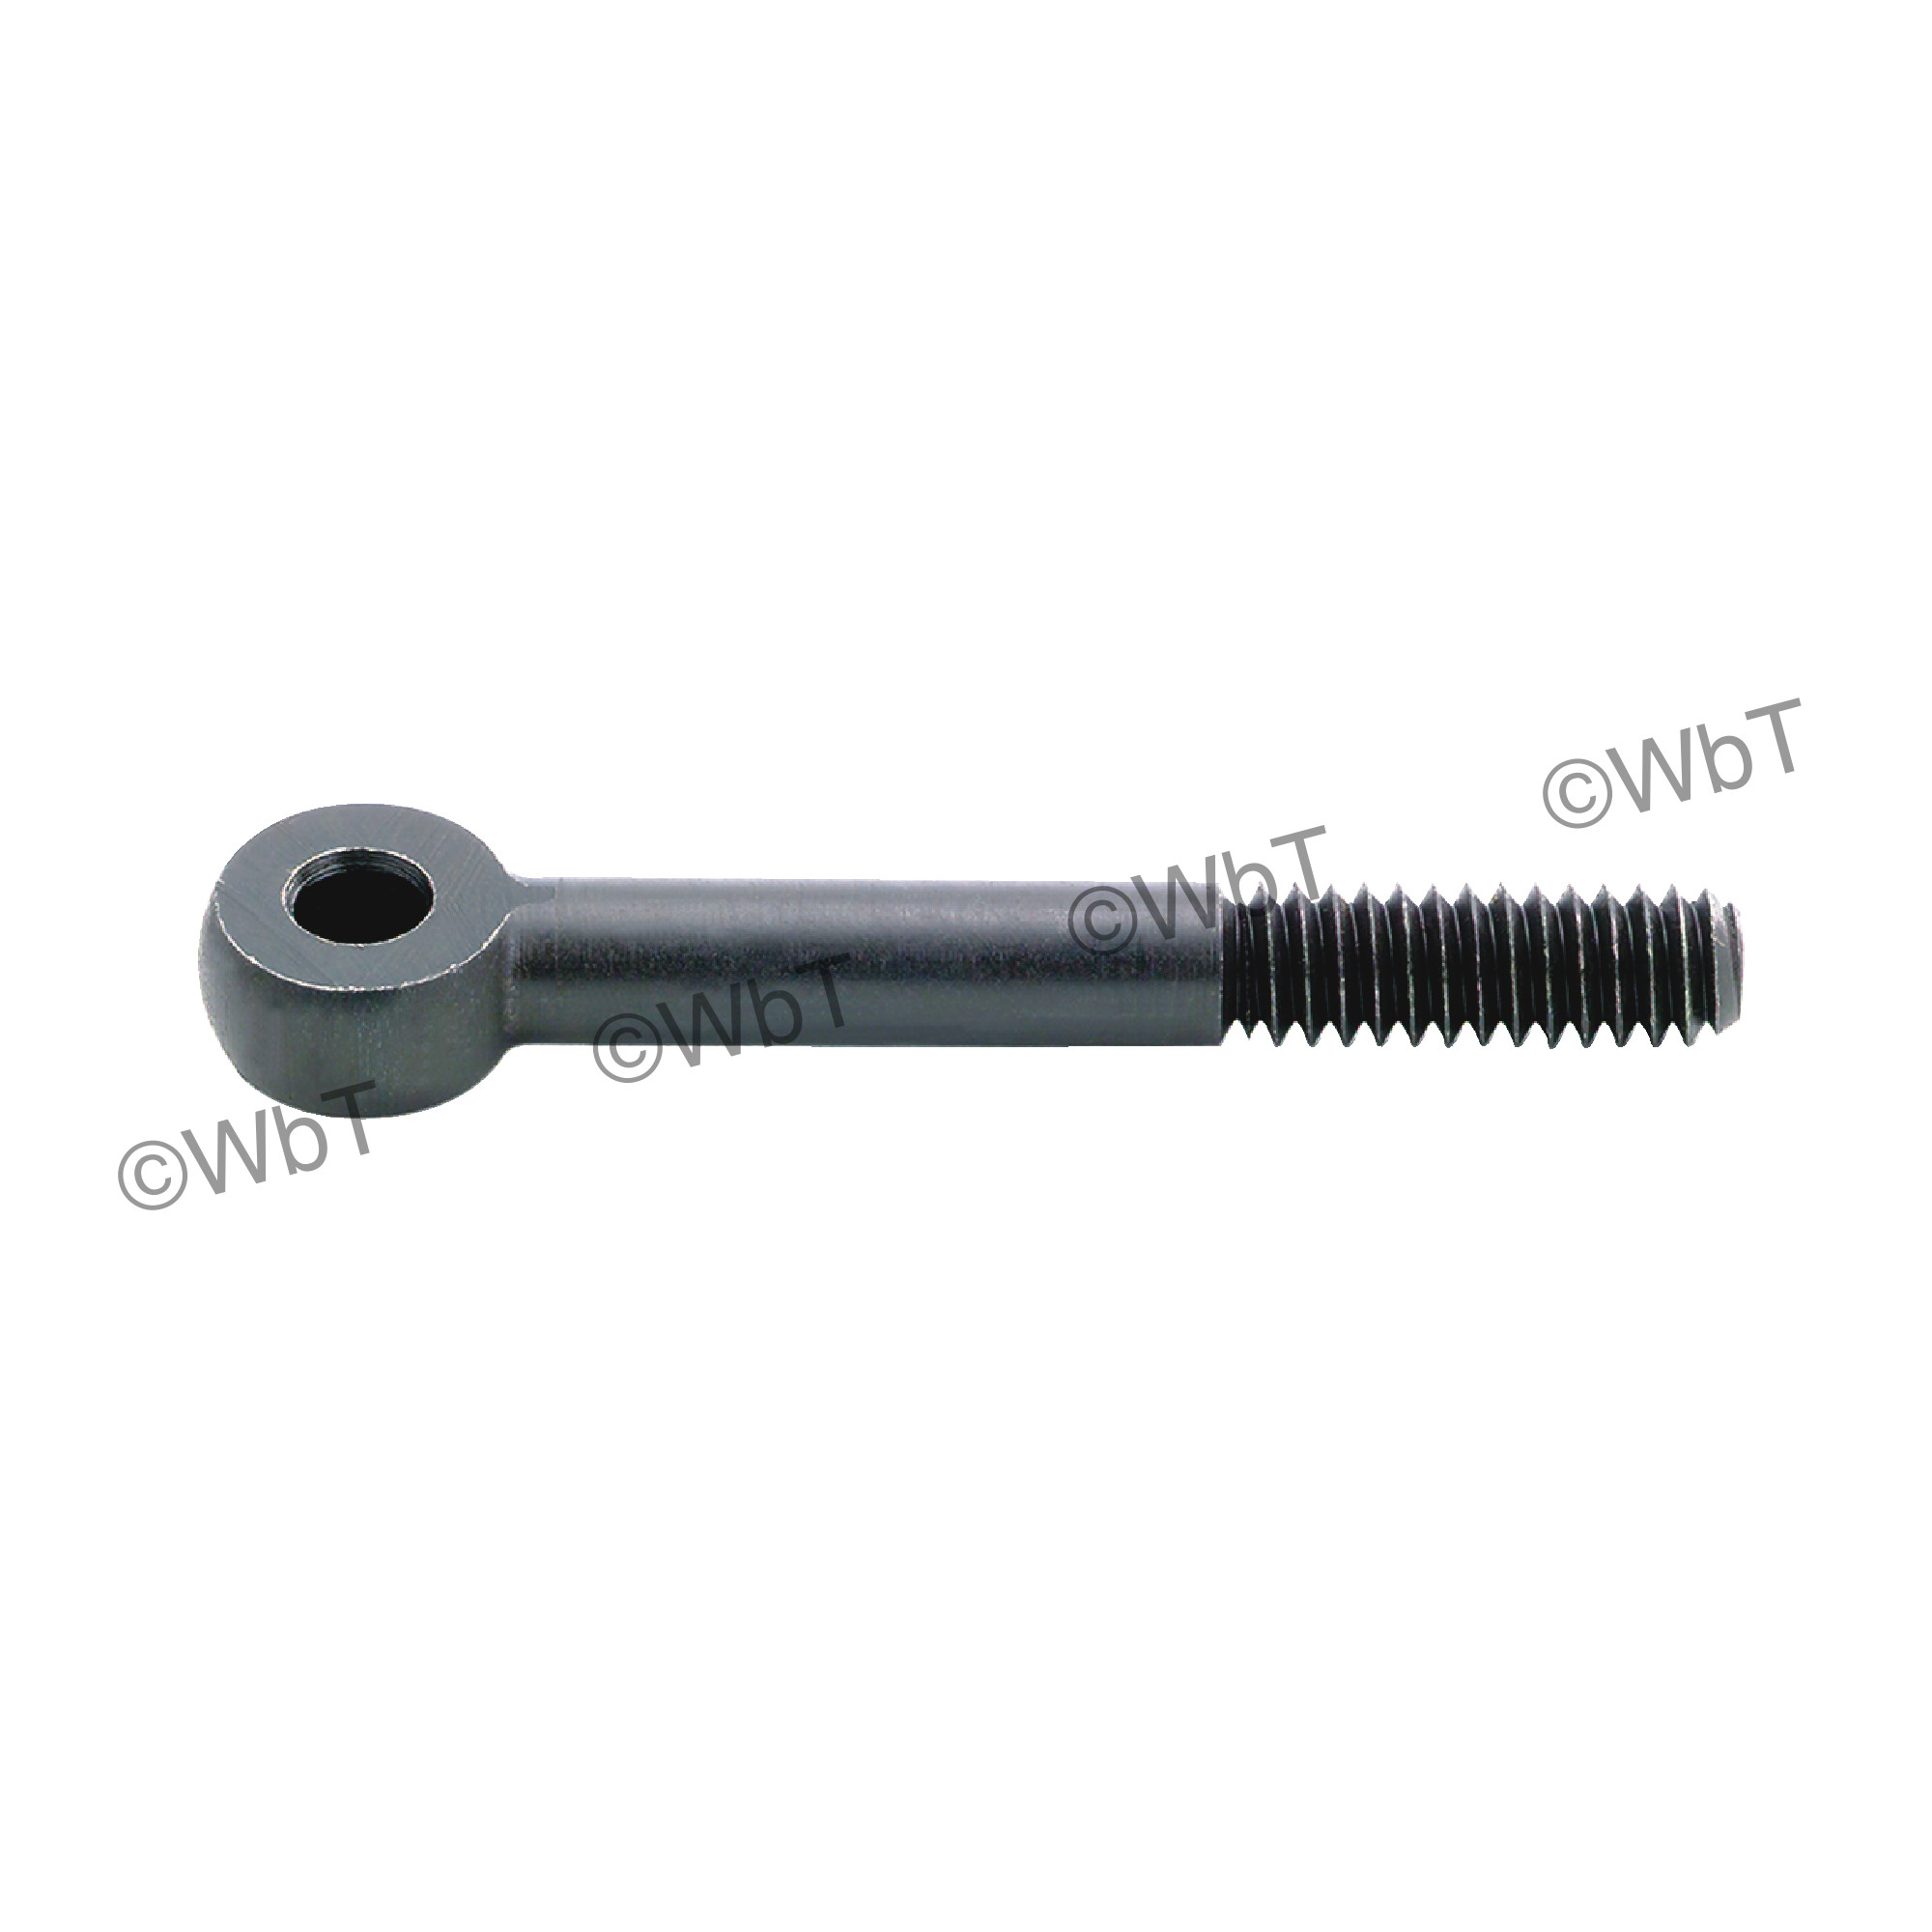 Alloy Steel Eye Bolt with Shoulder - For Lifting